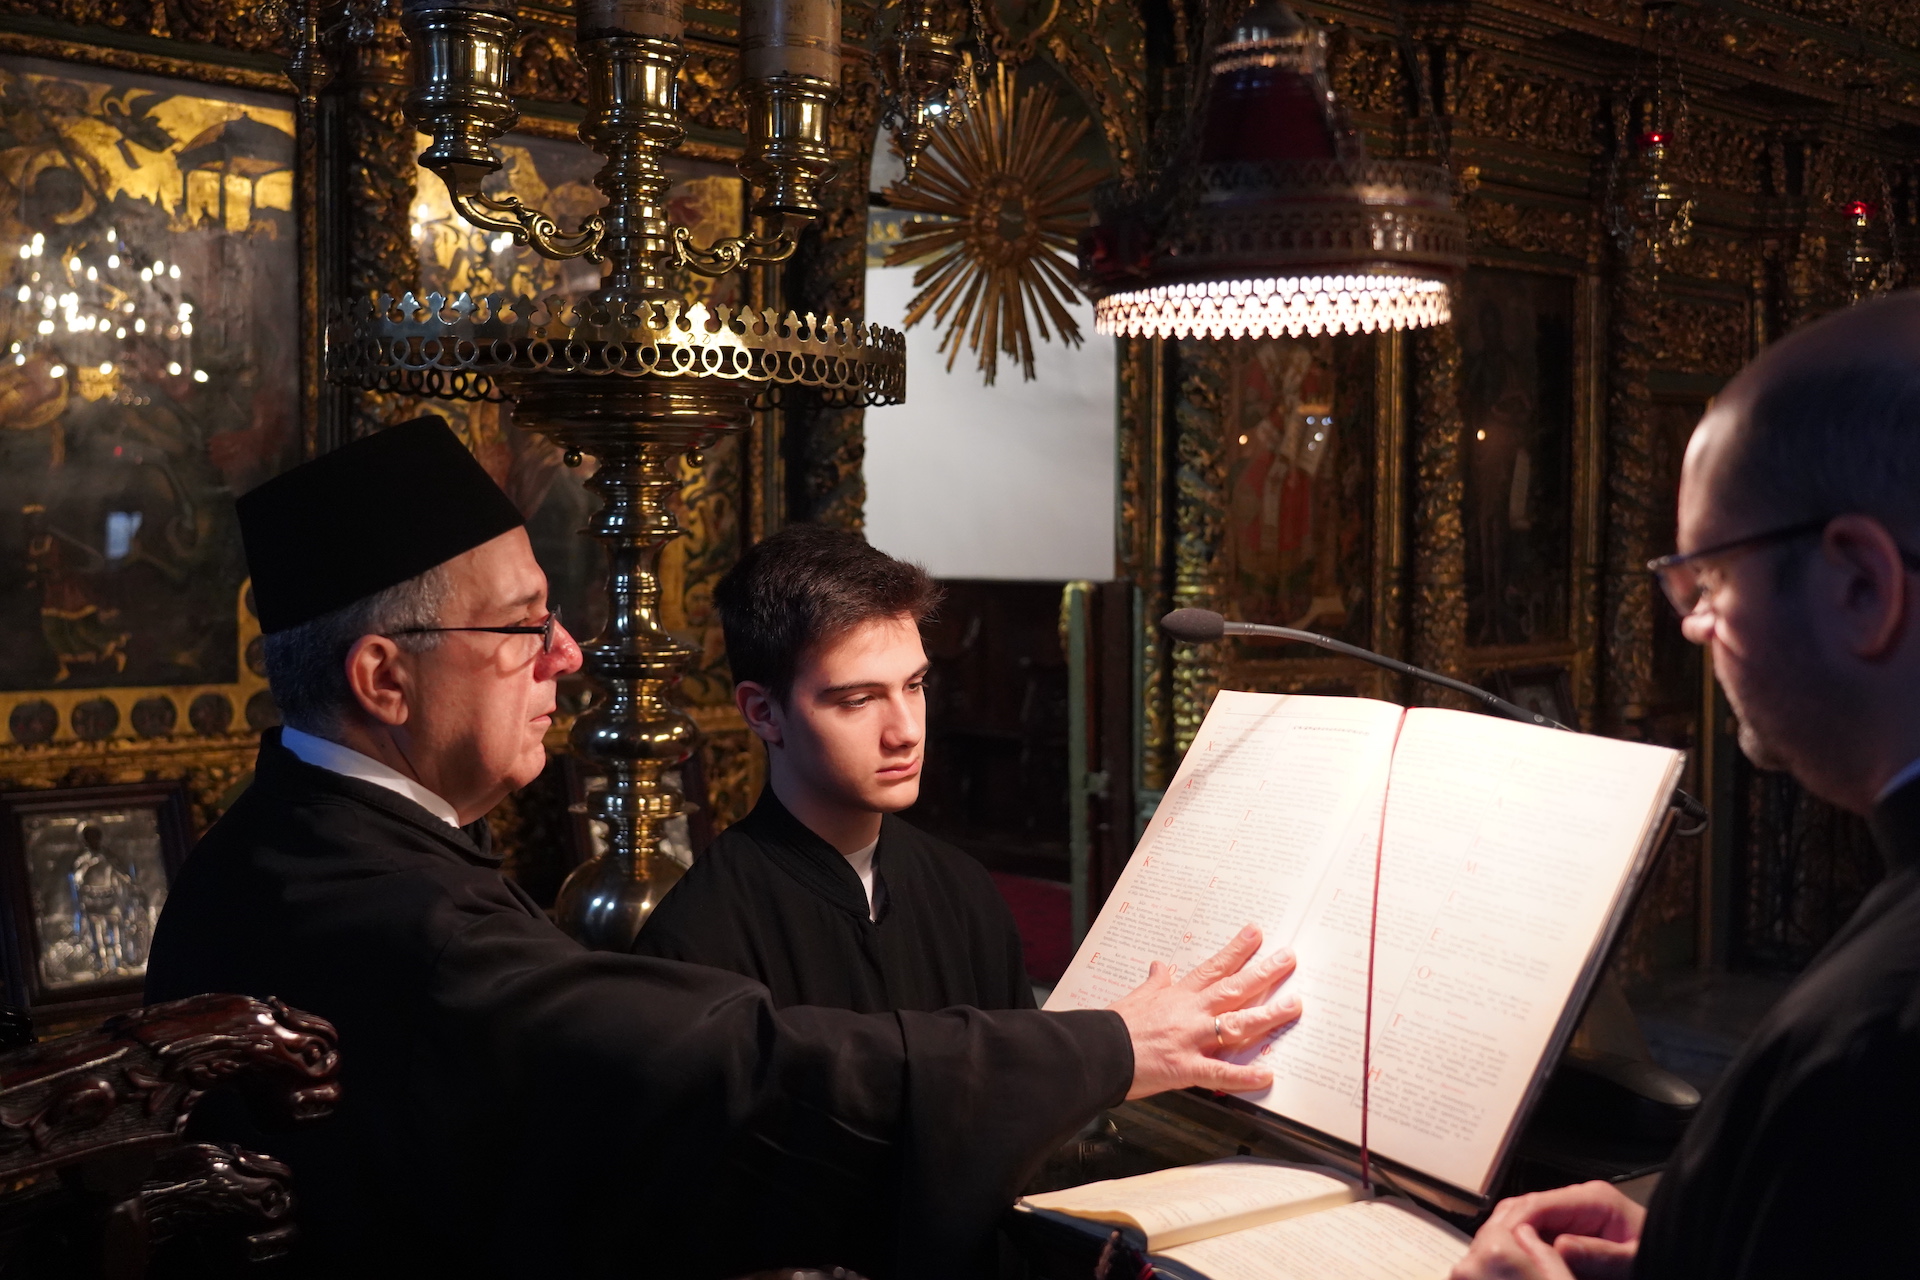 Metropolitan Isaiah of Tamassos and Oreinis officiated at the Venerable Patriarchal Church of Saint George